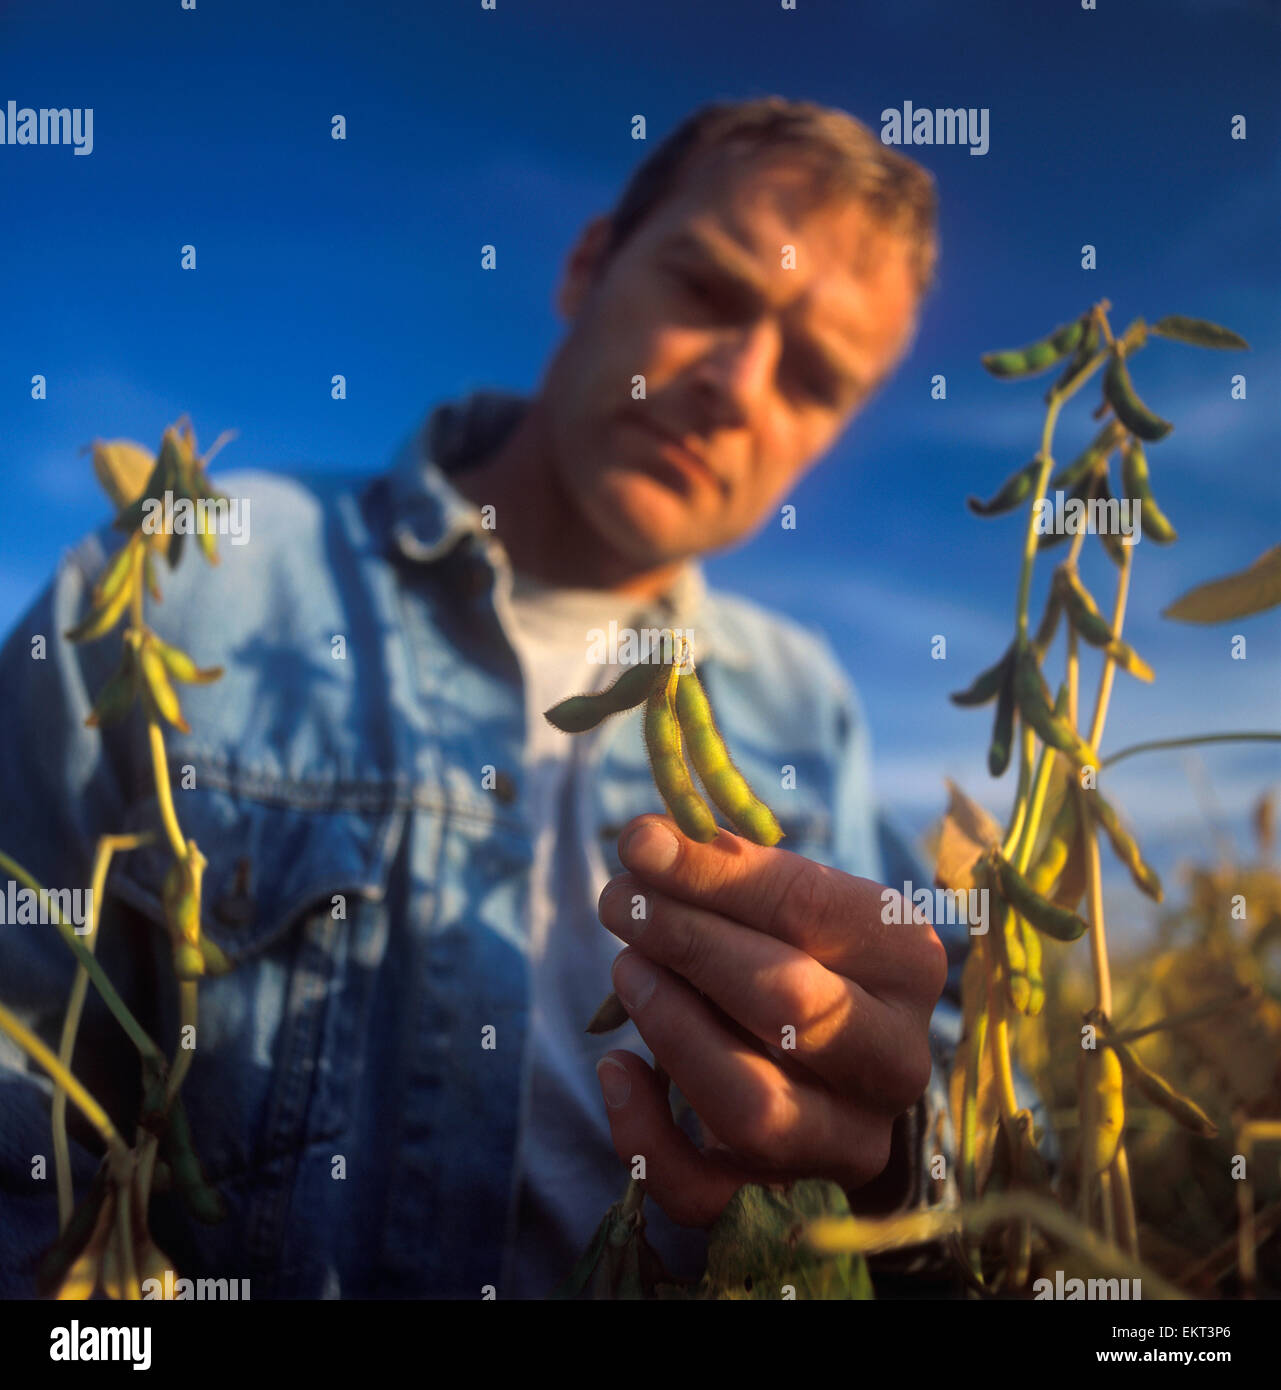 Agriculture - A farmer inspects maturing green soybean pods in the field / Ontario, Canada. Stock Photo